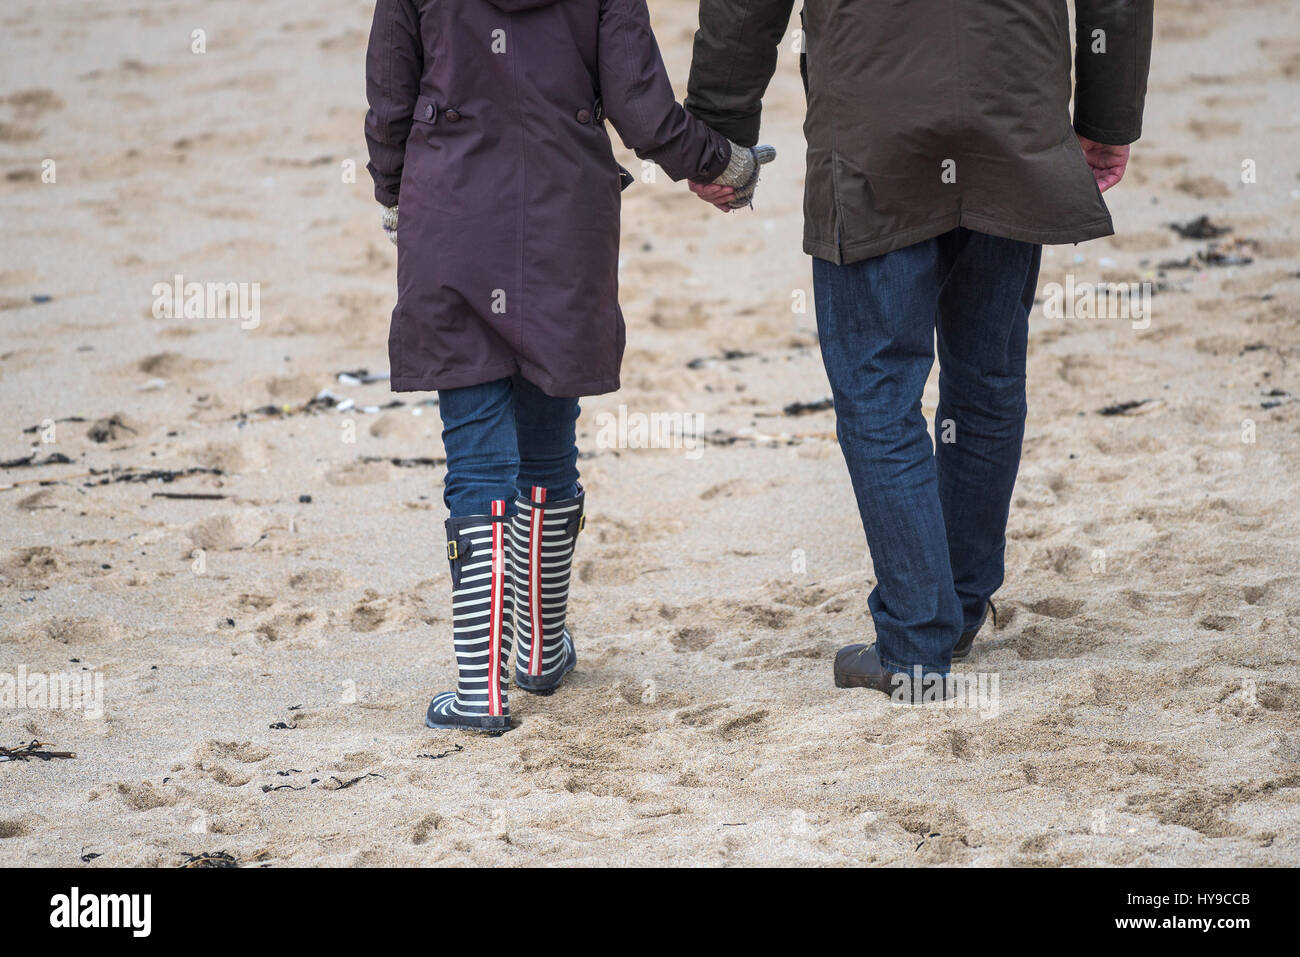 Couple Holding hands Walking Affection Relationship Togetherness Together Beach Sand Strolling Stock Photo